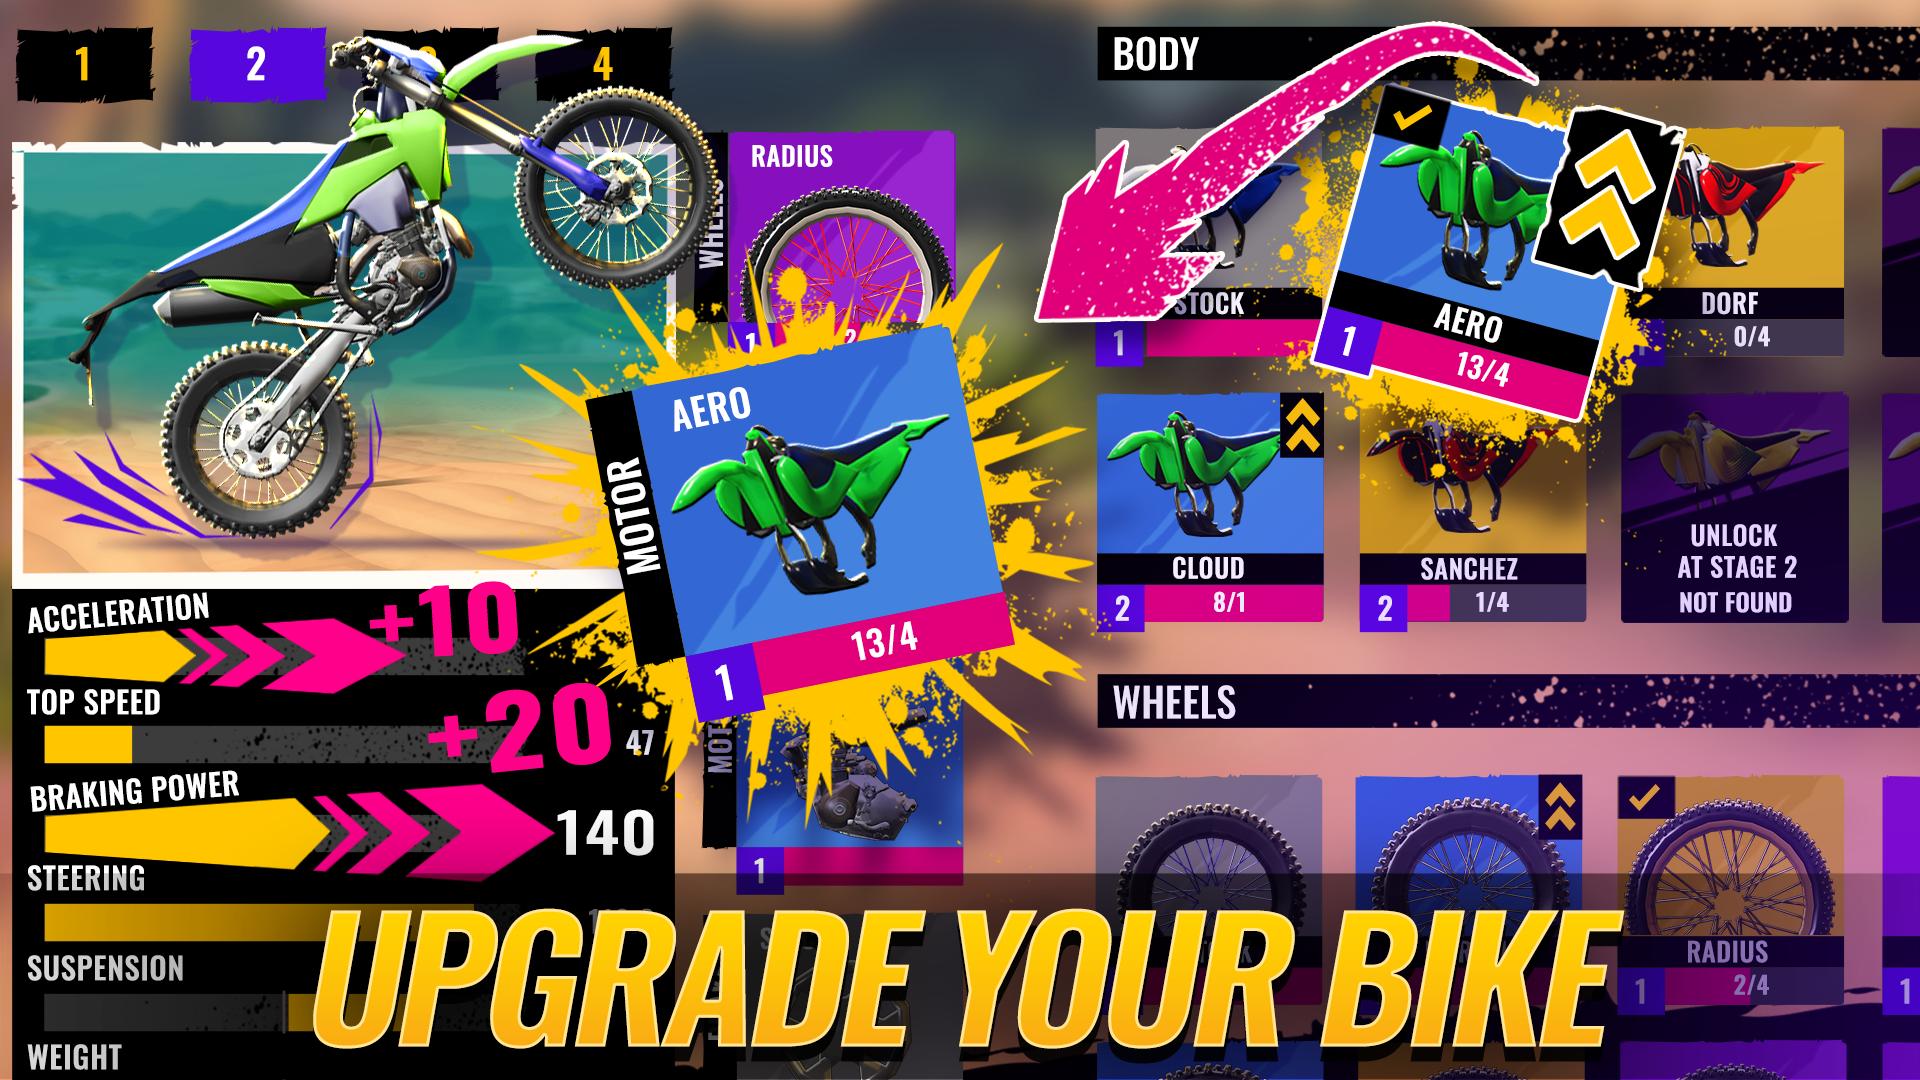 Play Bike Clash: PvP Cycle Game Online for Free on PC & Mobile